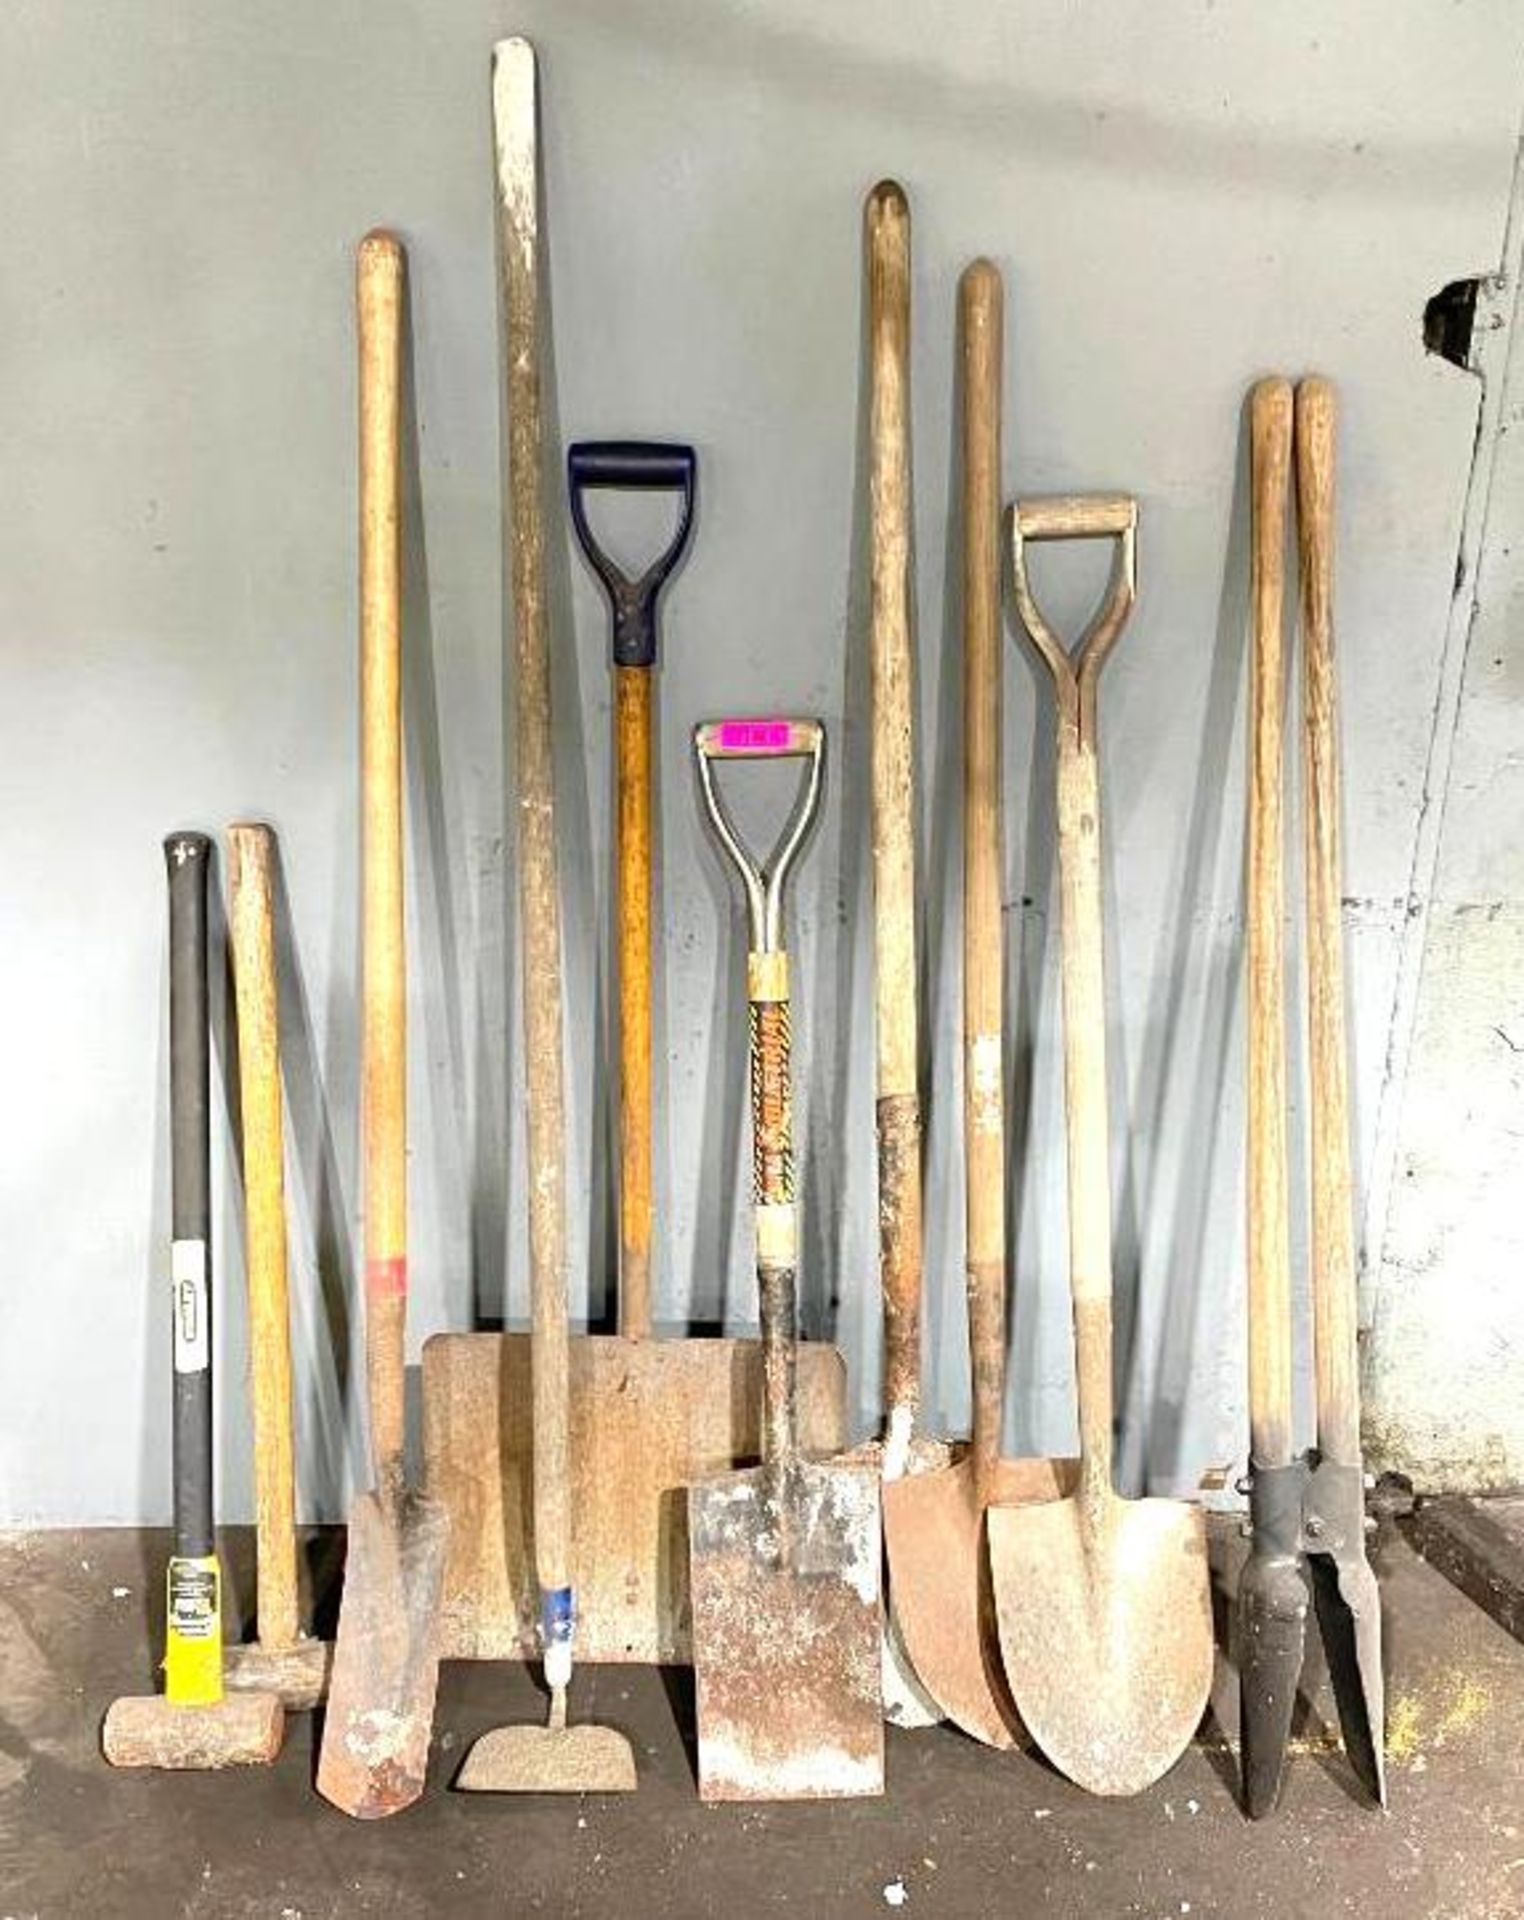 DESCRIPTION ASSORTED SHOVELS & HAND TOOLS AS SHOWN THIS LOT IS ONE MONEY QUANTITY 1 ASSORTED SHOVELS